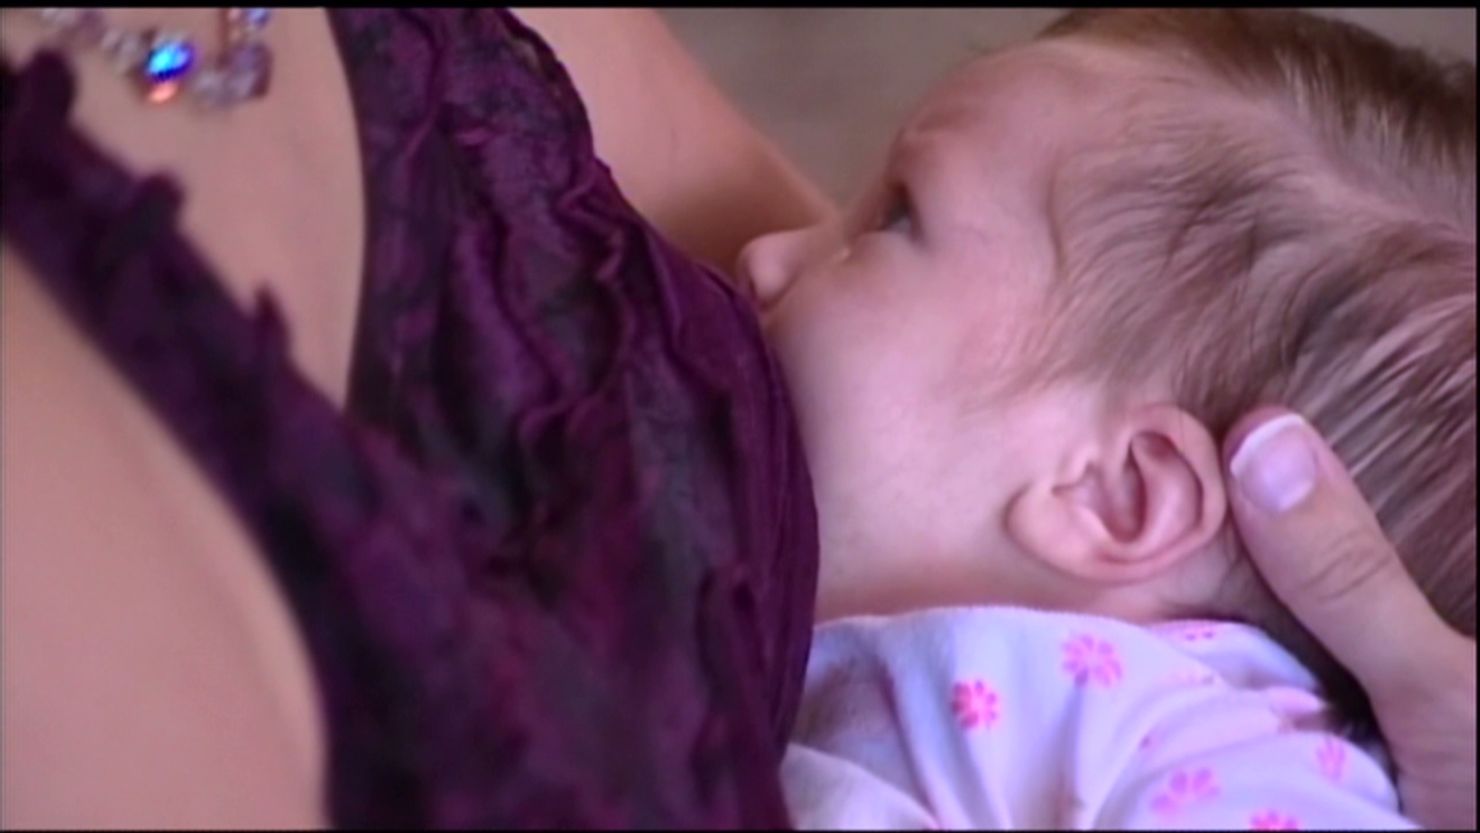 Breast-feeding should continue for at least 12 months, the American Academy of Pediatrics recommends.